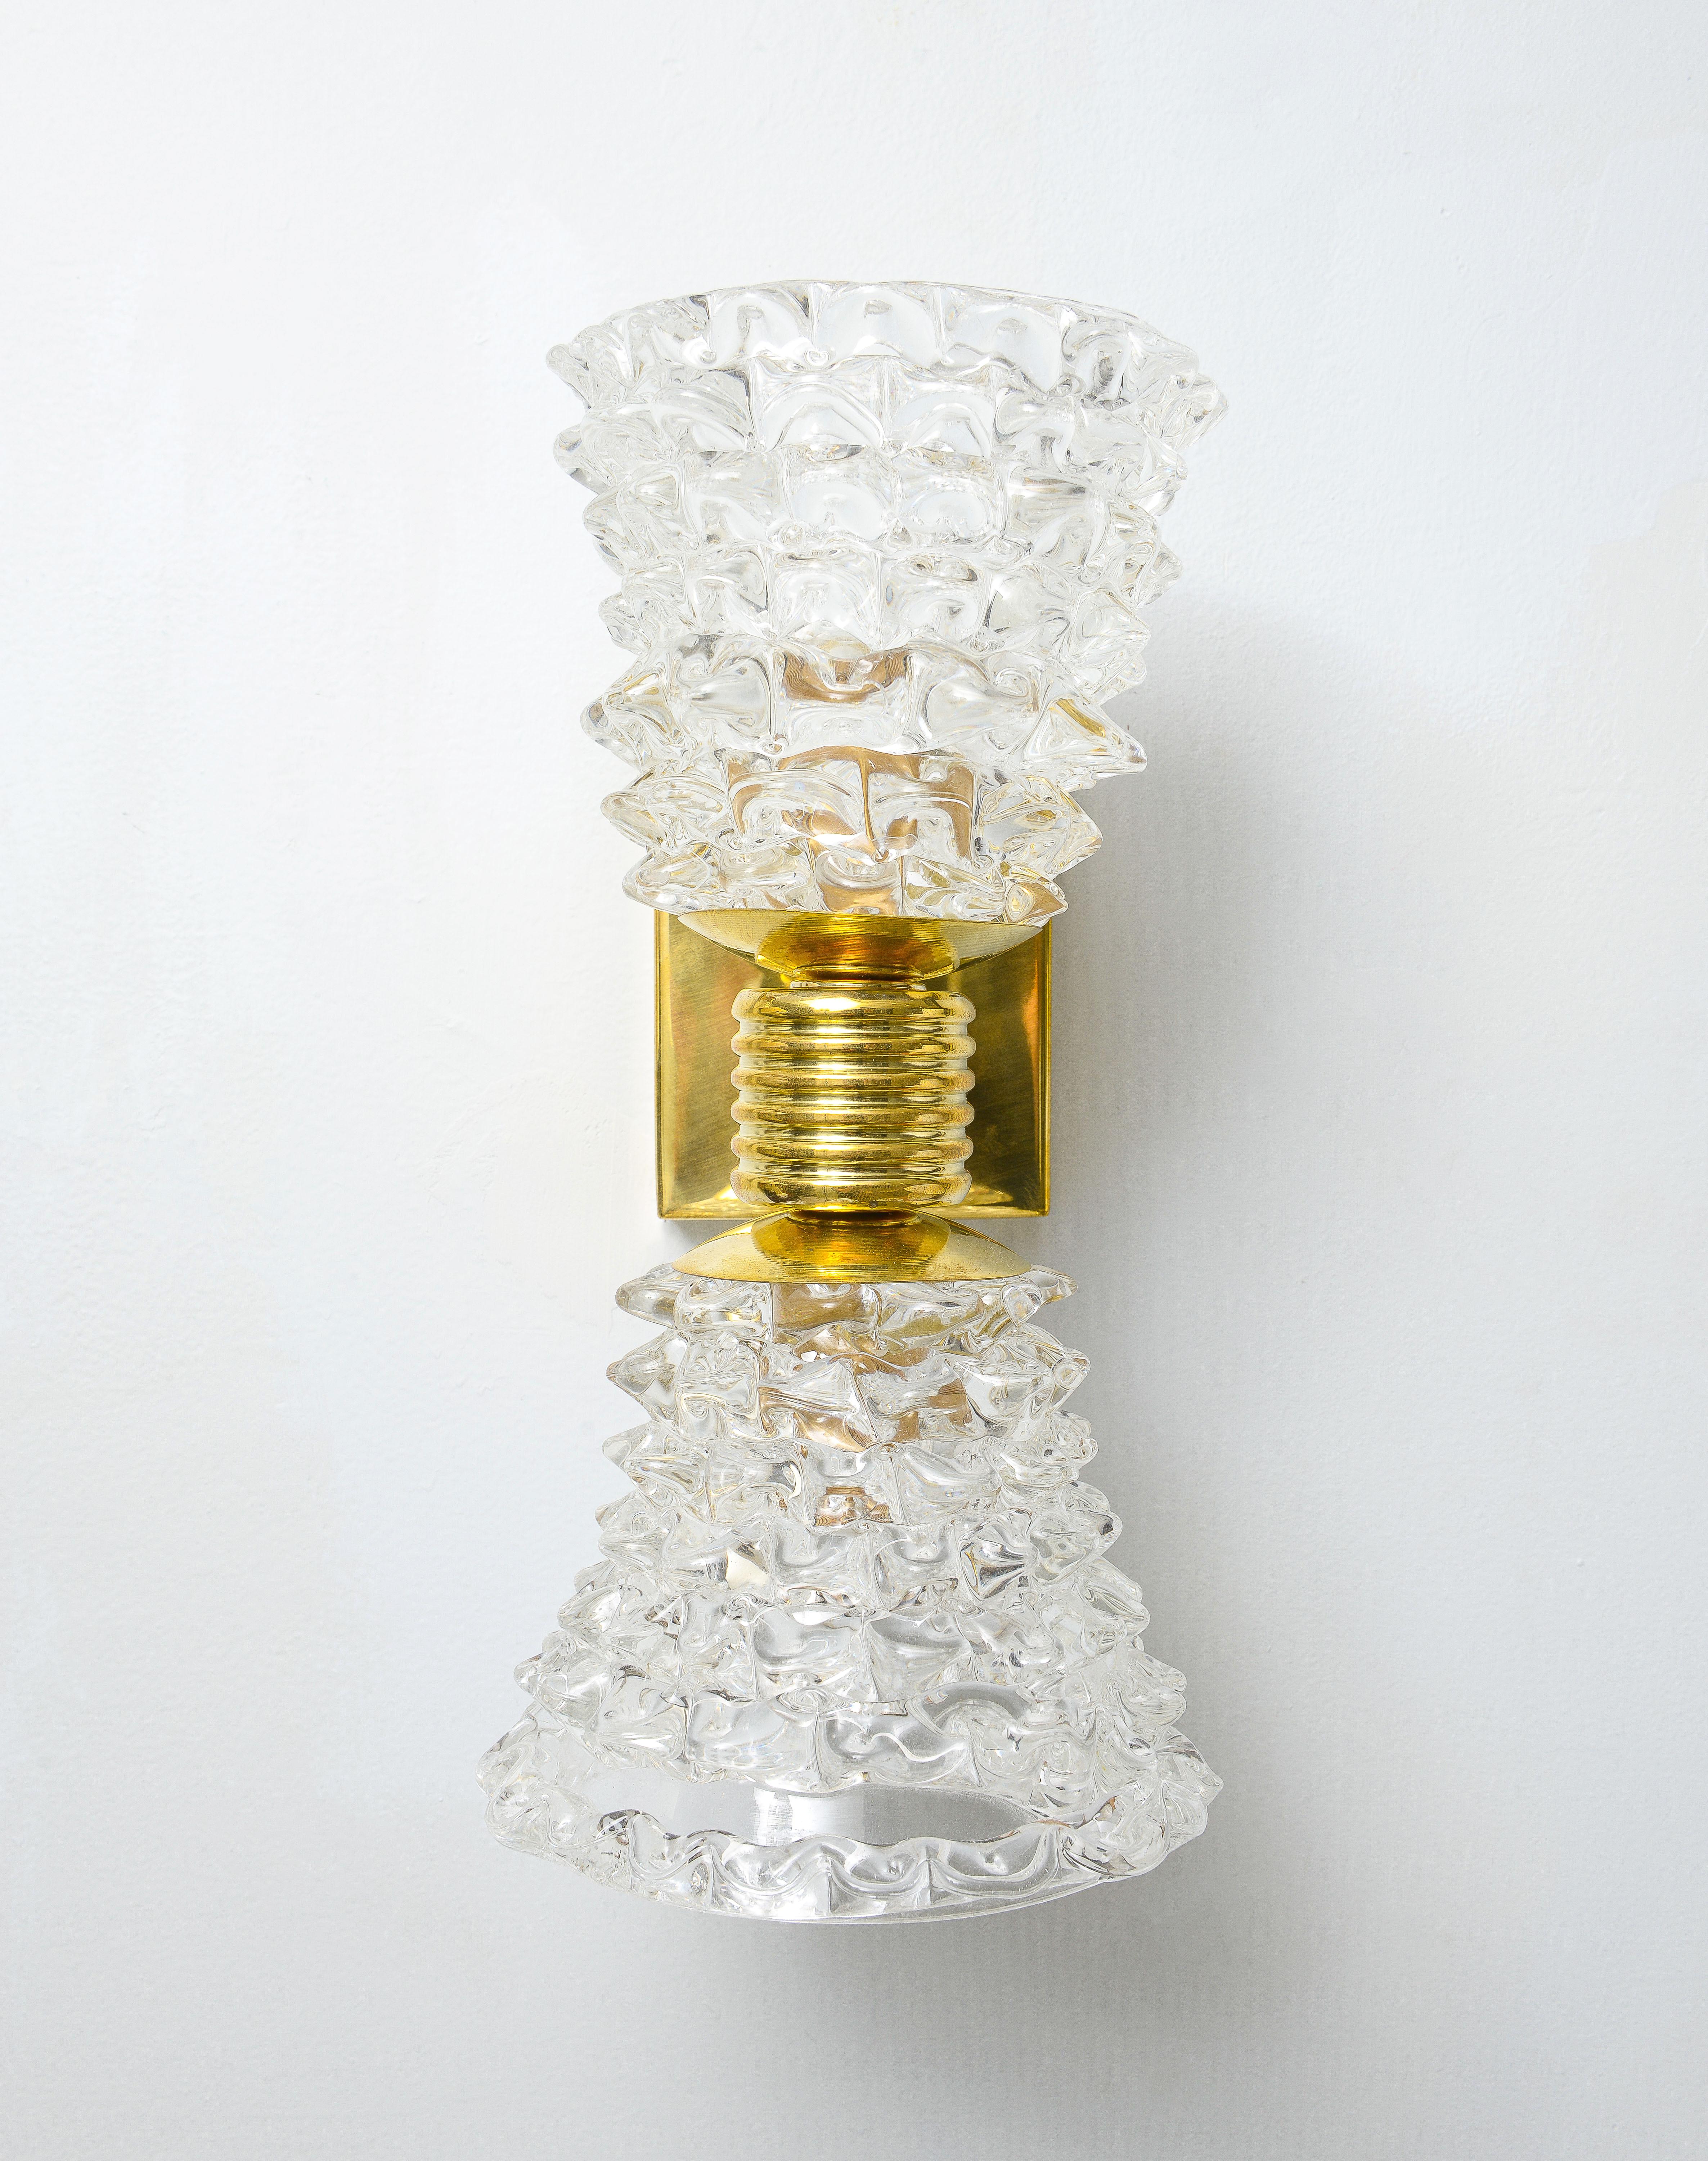 Contemporary Italian Rostrato Double-Arm Murano Glass and Brass Sconces.
We currently have one pair readily available.